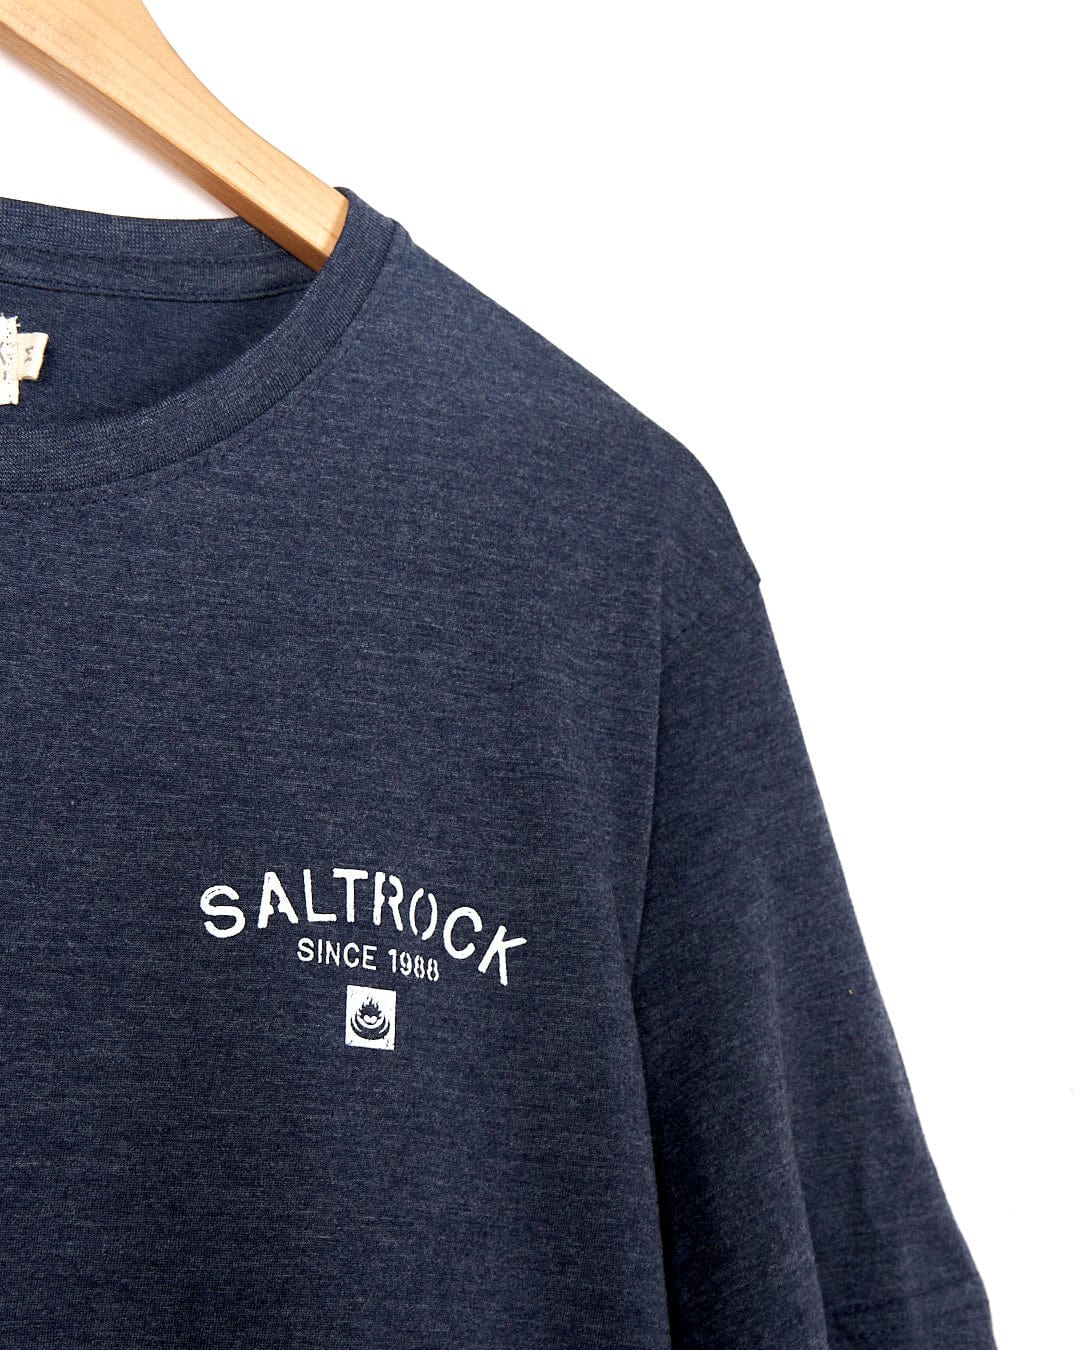 A navy Stencil - Mens Location T-Shirt - Saundersfoot - Blue with the word Saltrock on it.